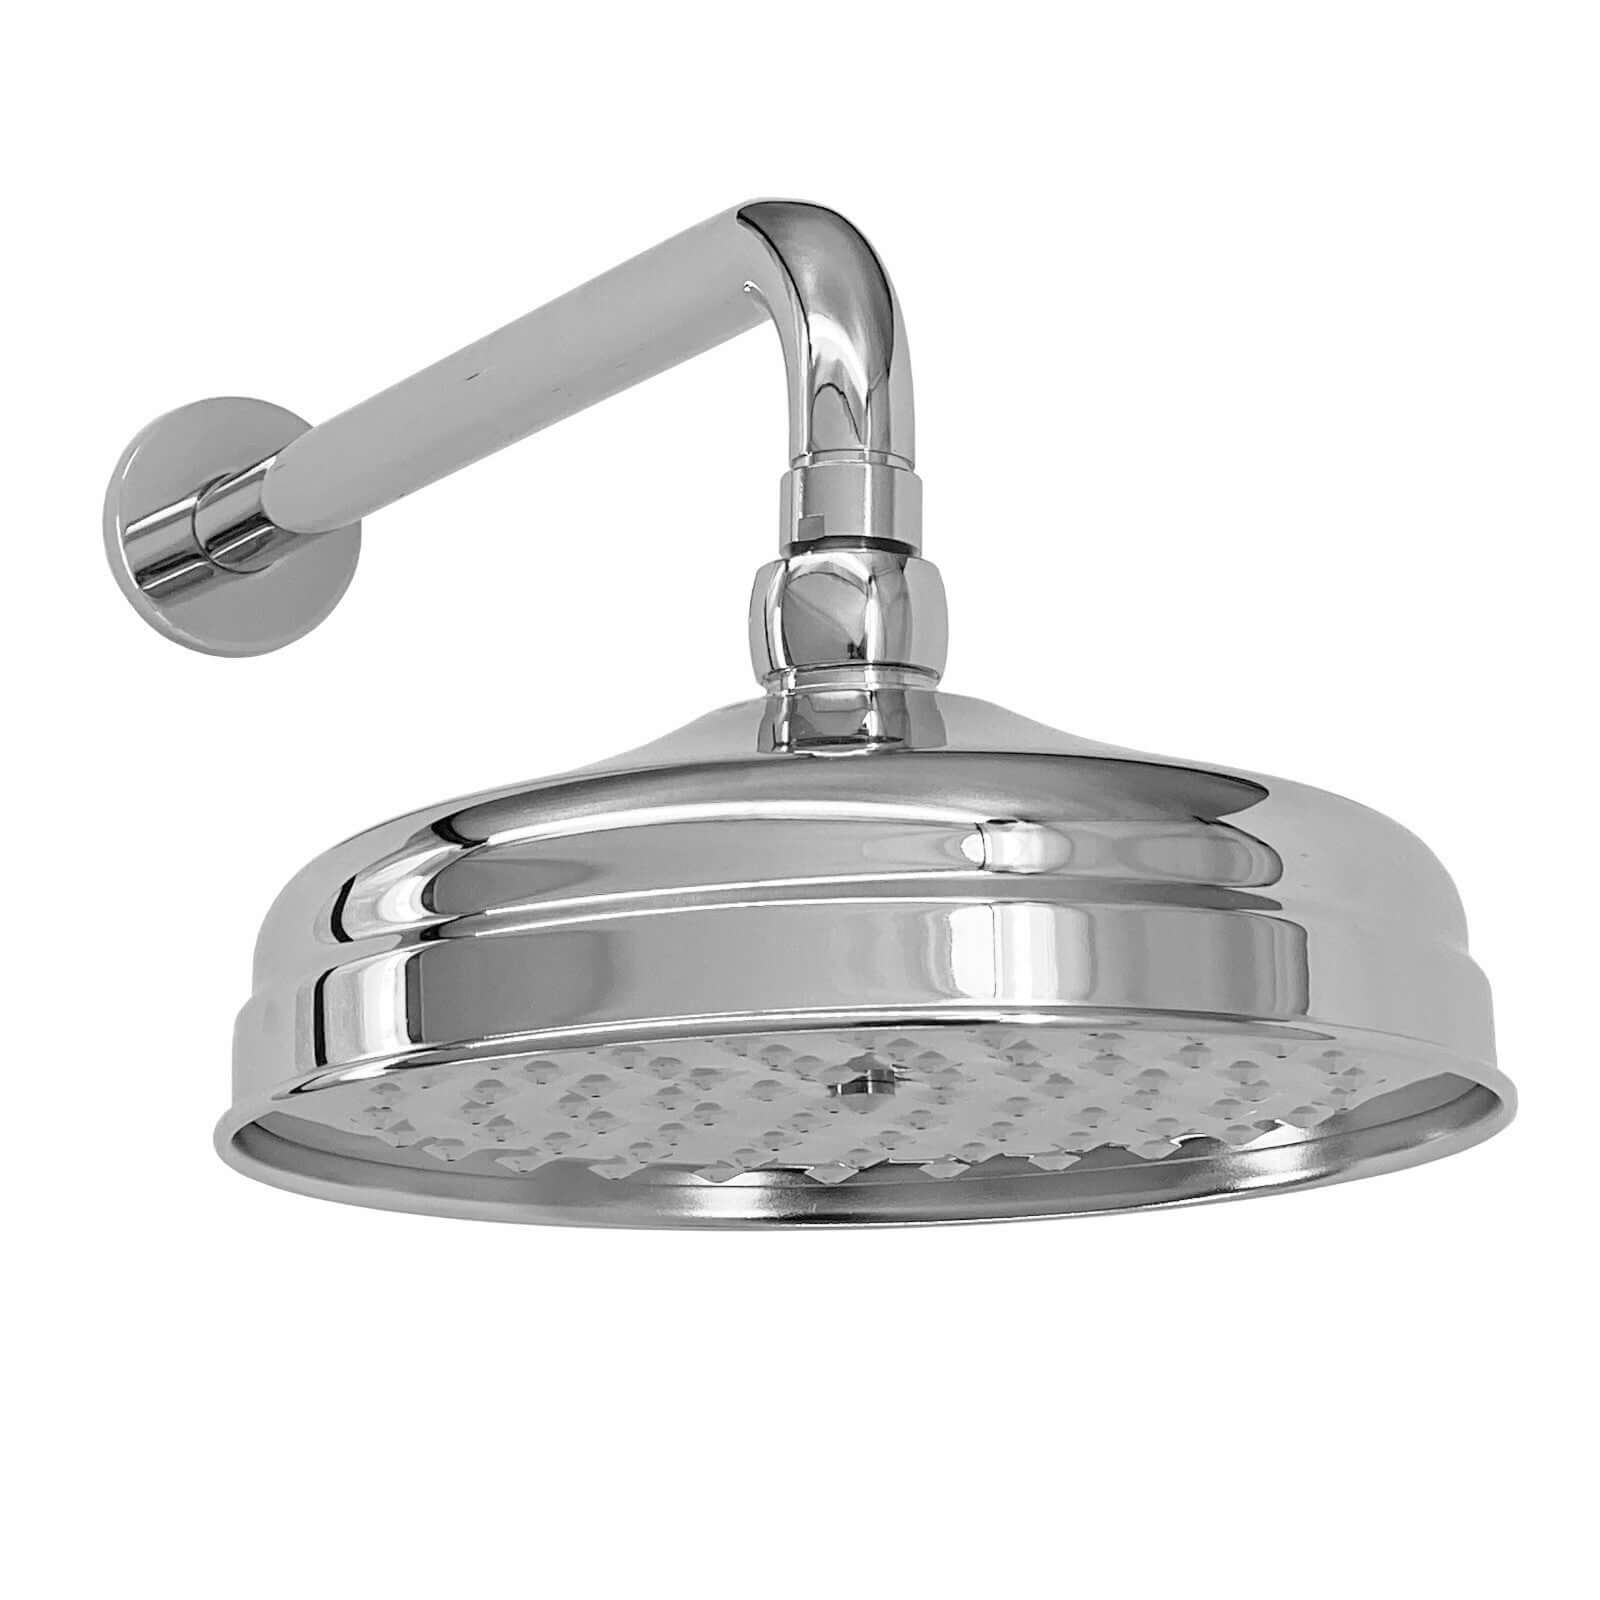 SH0274-03-RA053-01-traditional-wall-fixed-apron-brass-shower-head-8-with-shower-arm-chrome